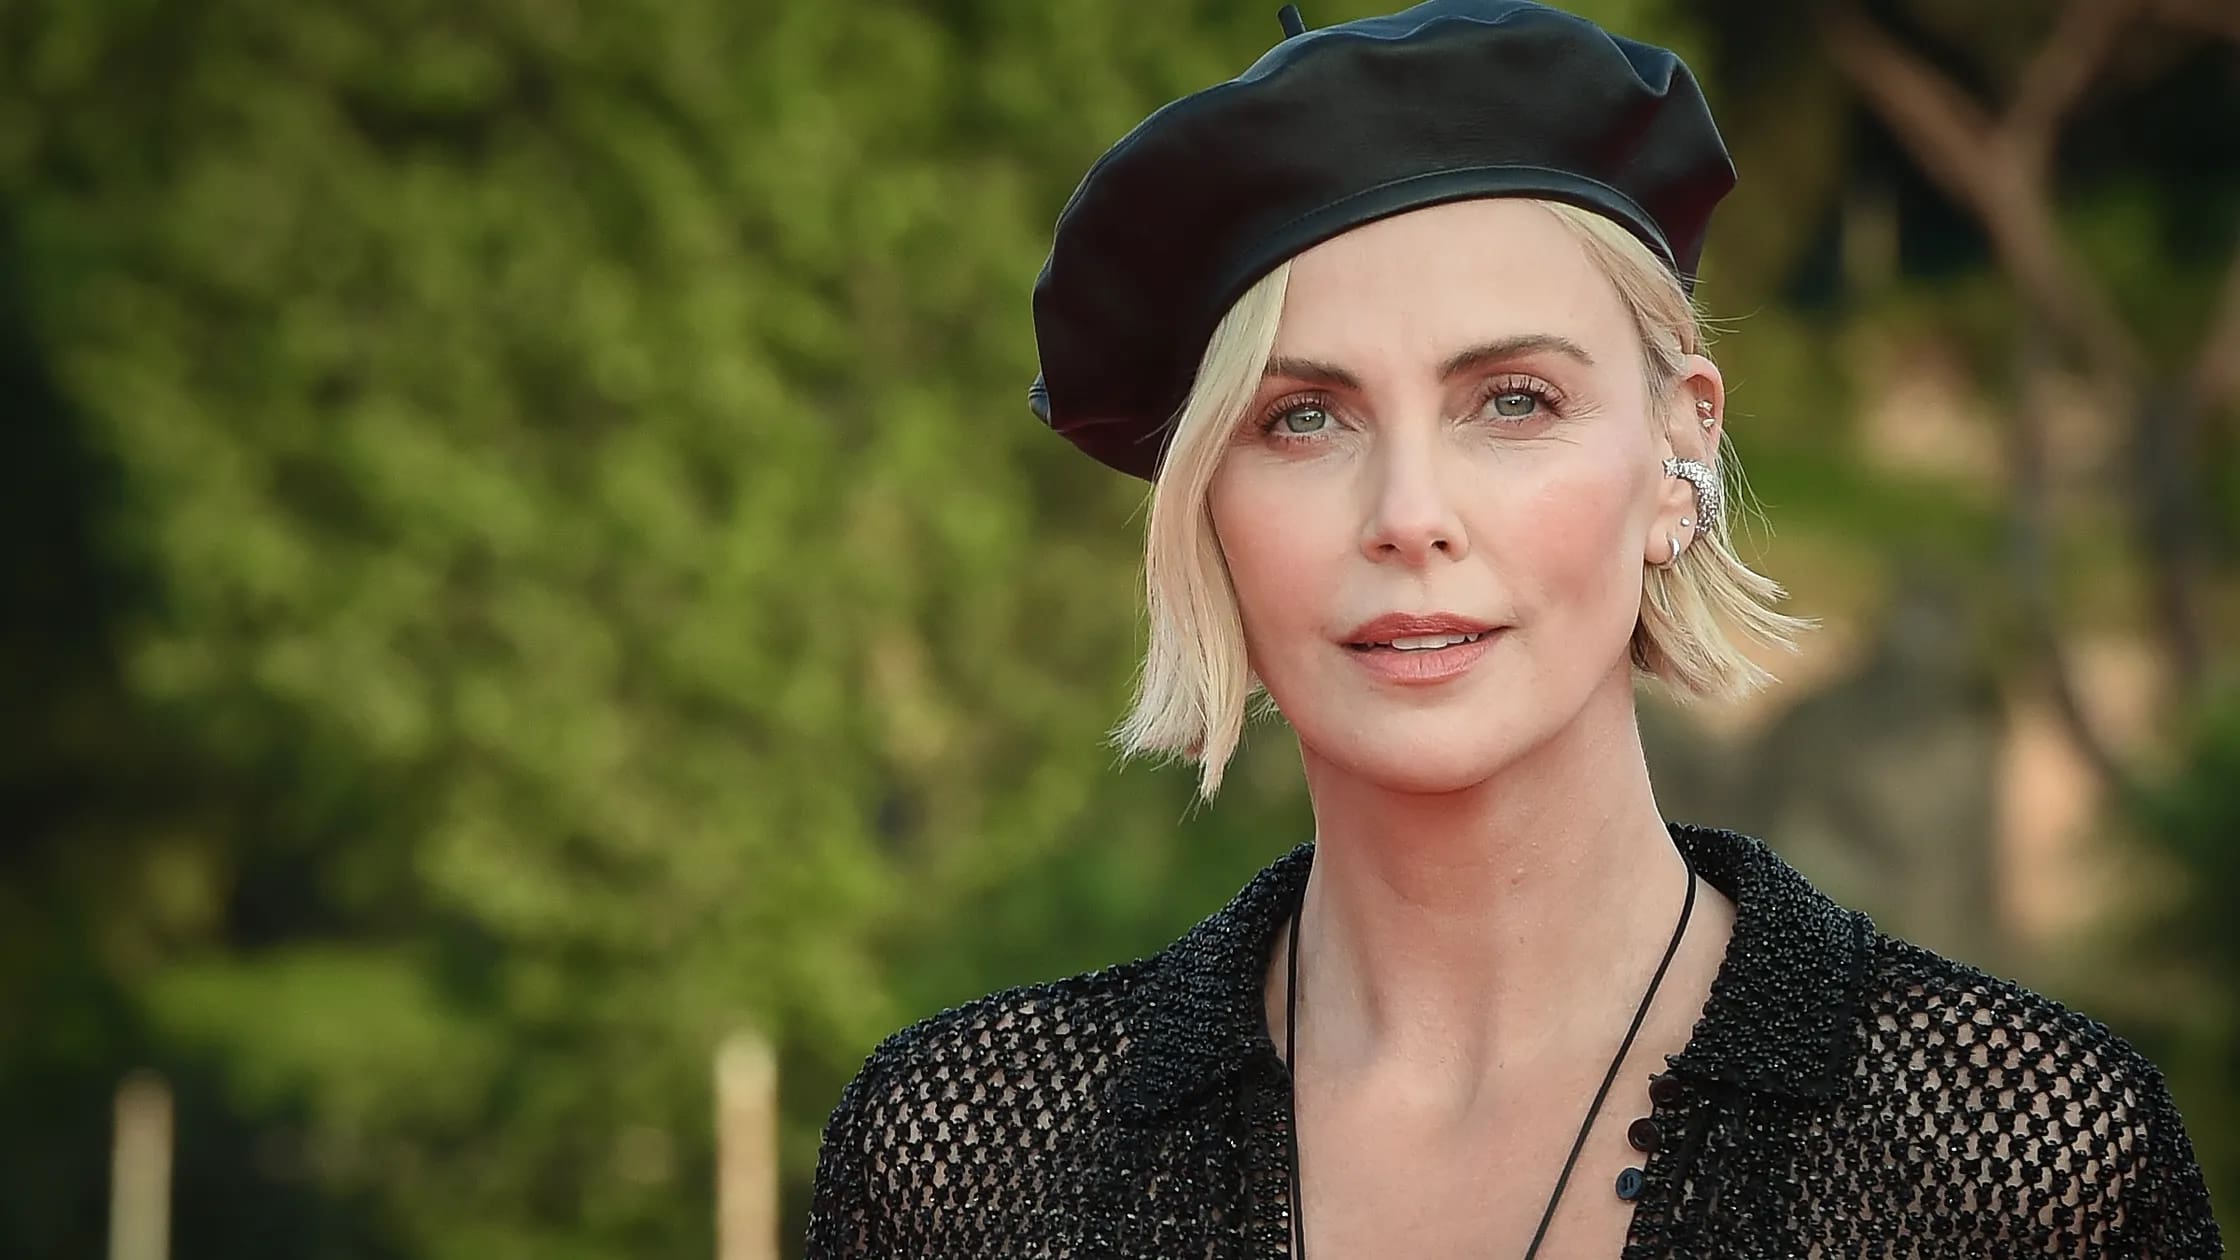 Charlize Theron On The Rumors That She’s Had Plastic Surgery: ‘B*tch, I’m Just Aging!’